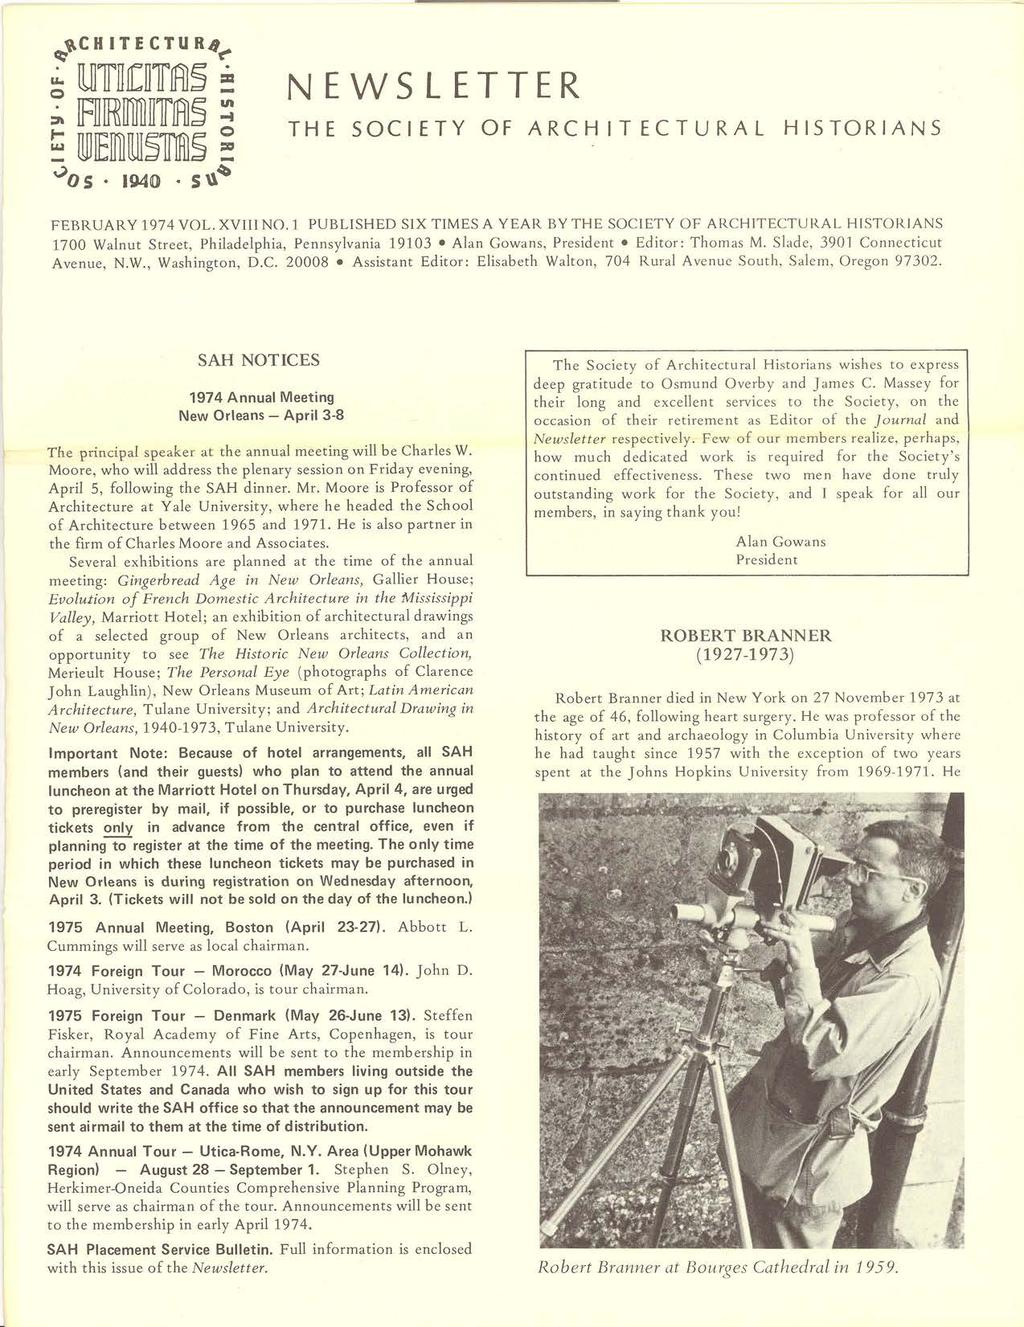 NEWSLETTER THE SOCIETY OF ARCHITECTURAL HISTORIANS FEBRUARY 1974 VOL. XVIII N0.